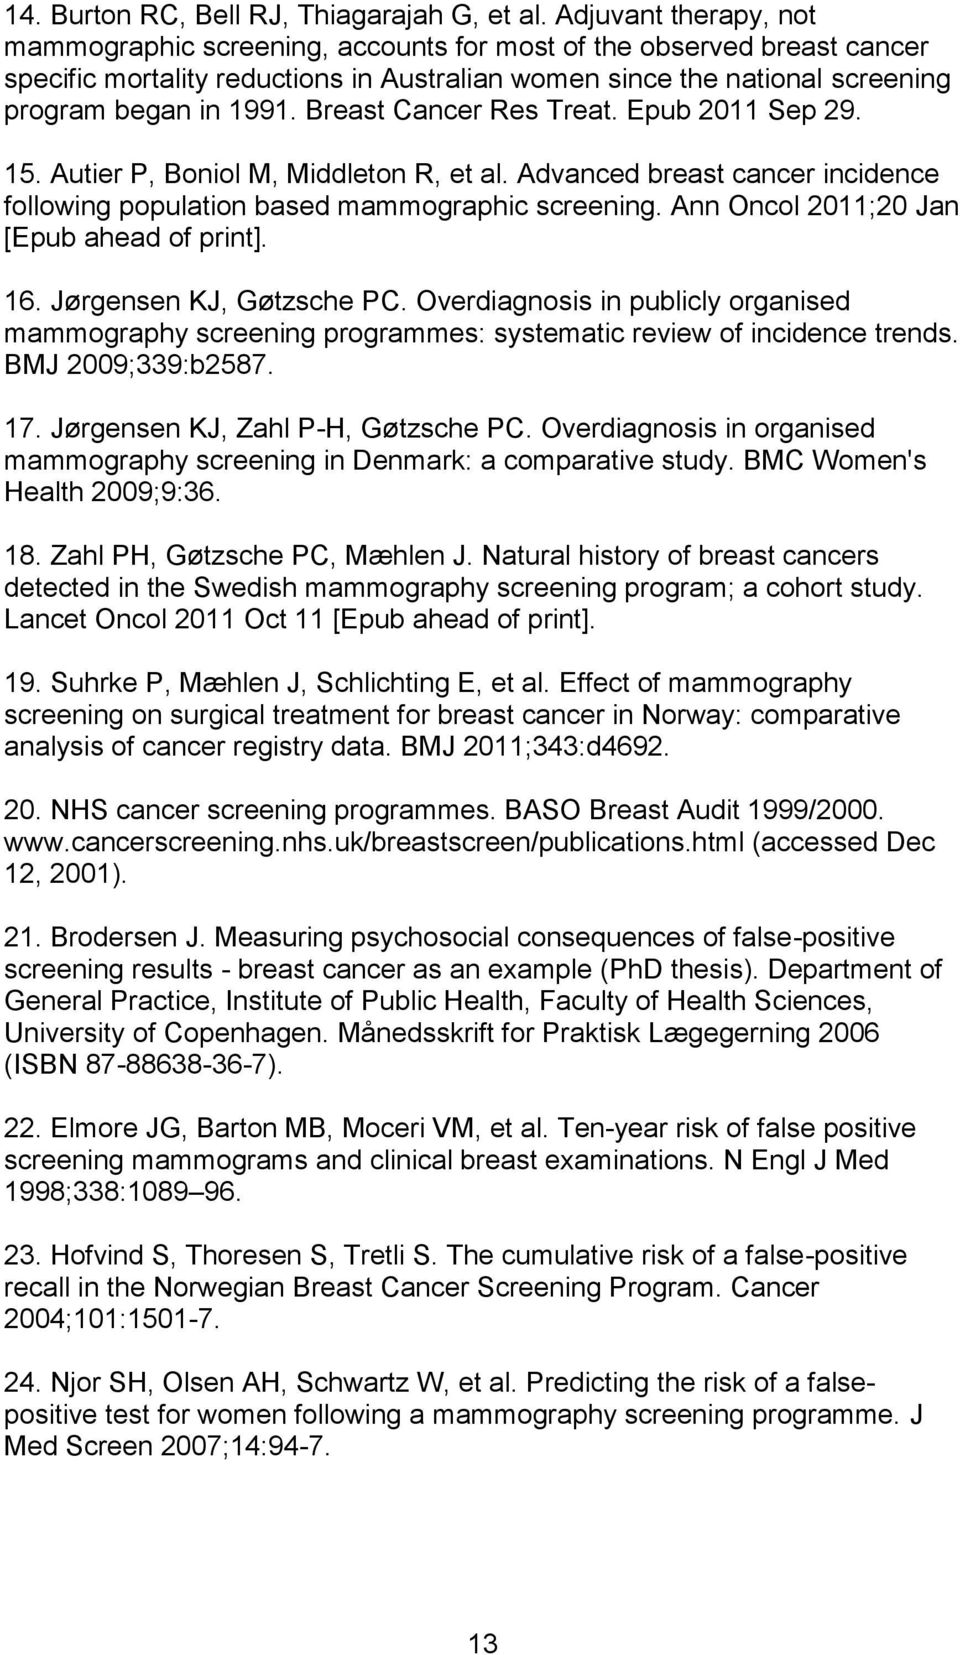 Breast Cancer Res Treat. Epub 2011 Sep 29. 15. Autier P, Boniol M, Middleton R, et al. Advanced breast cancer incidence following population based mammographic screening.